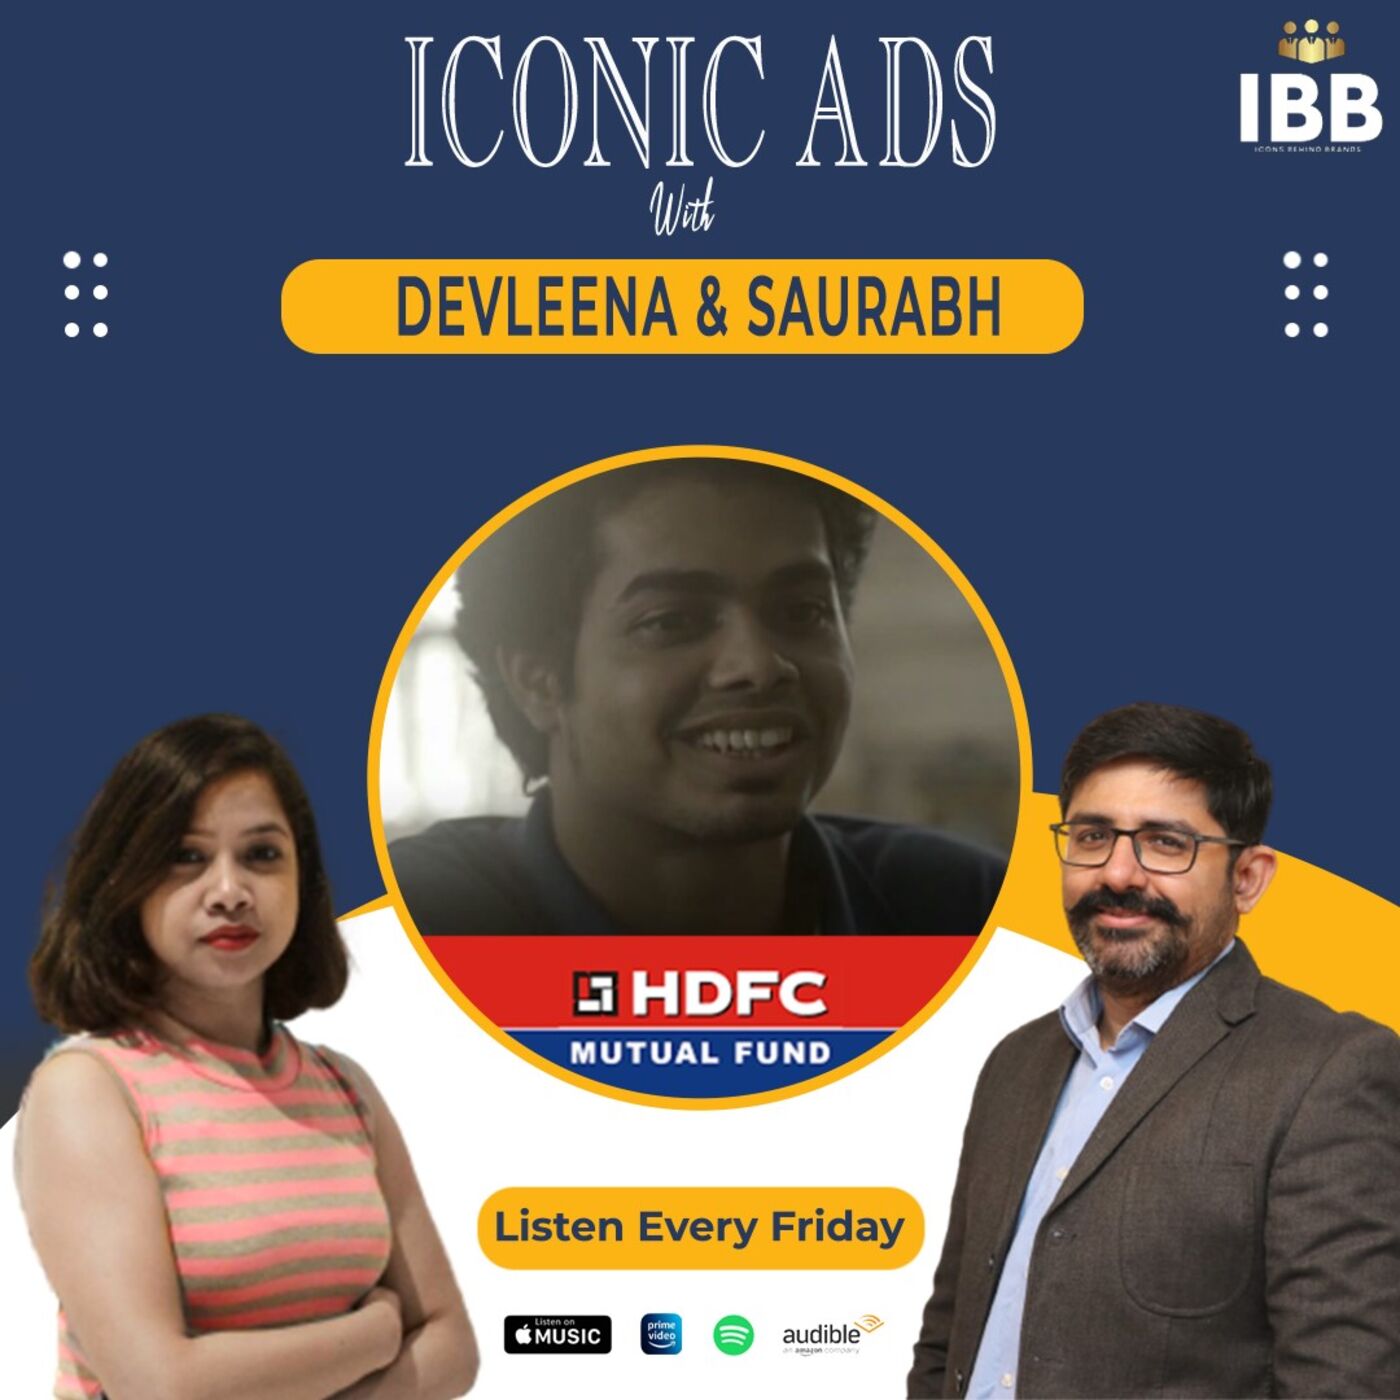 Iconic ads with Devleena and Saurabh: HDFC ads